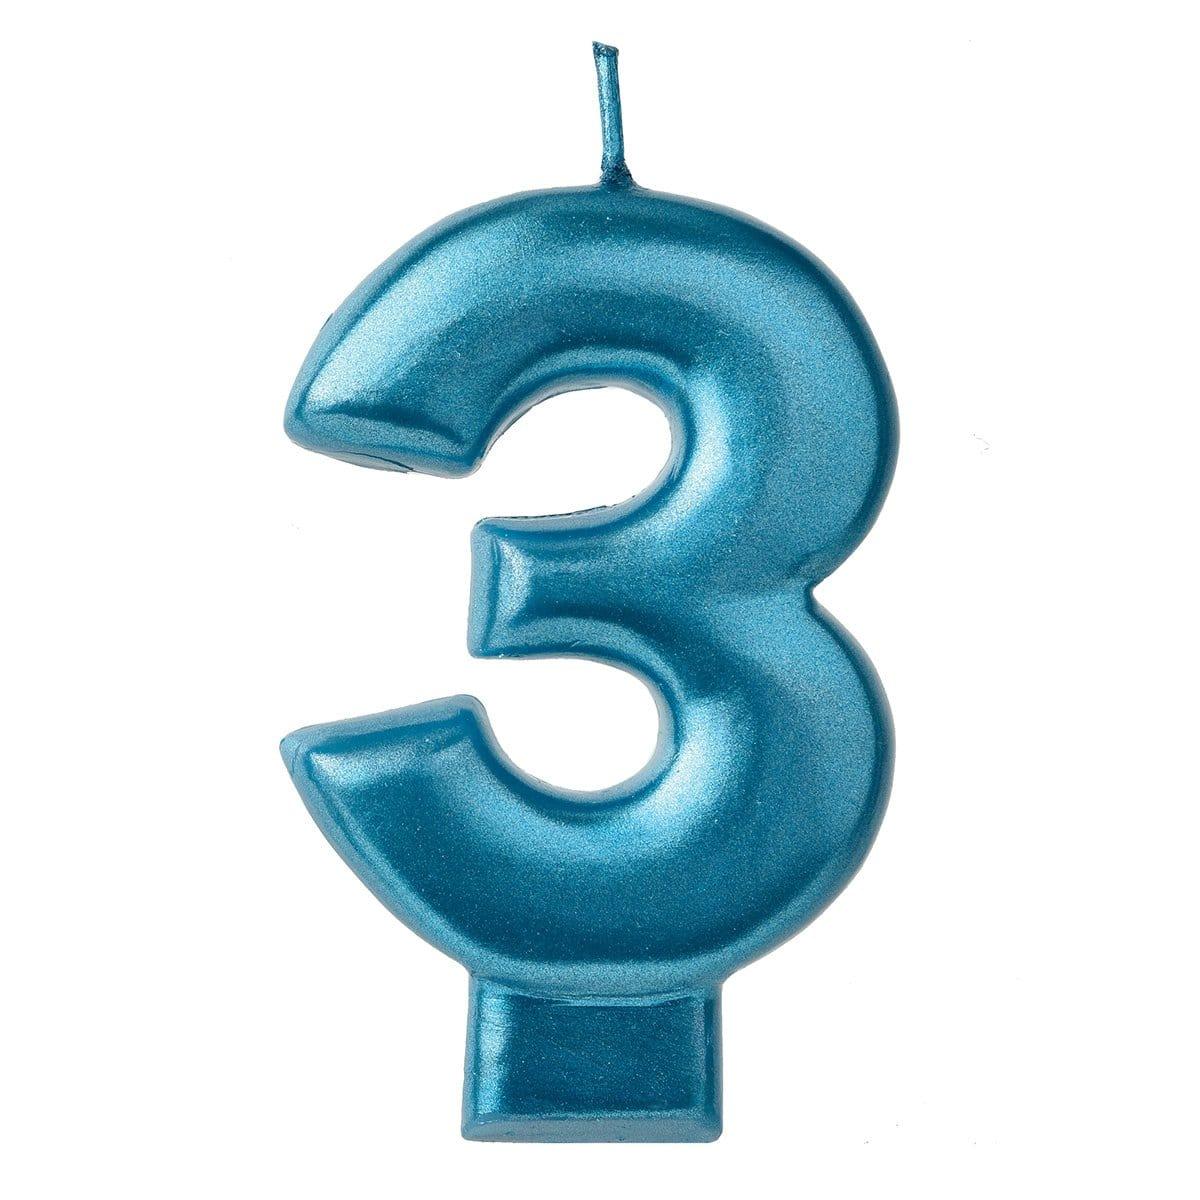 Buy Cake Supplies Blue Numeral Candle #3 sold at Party Expert